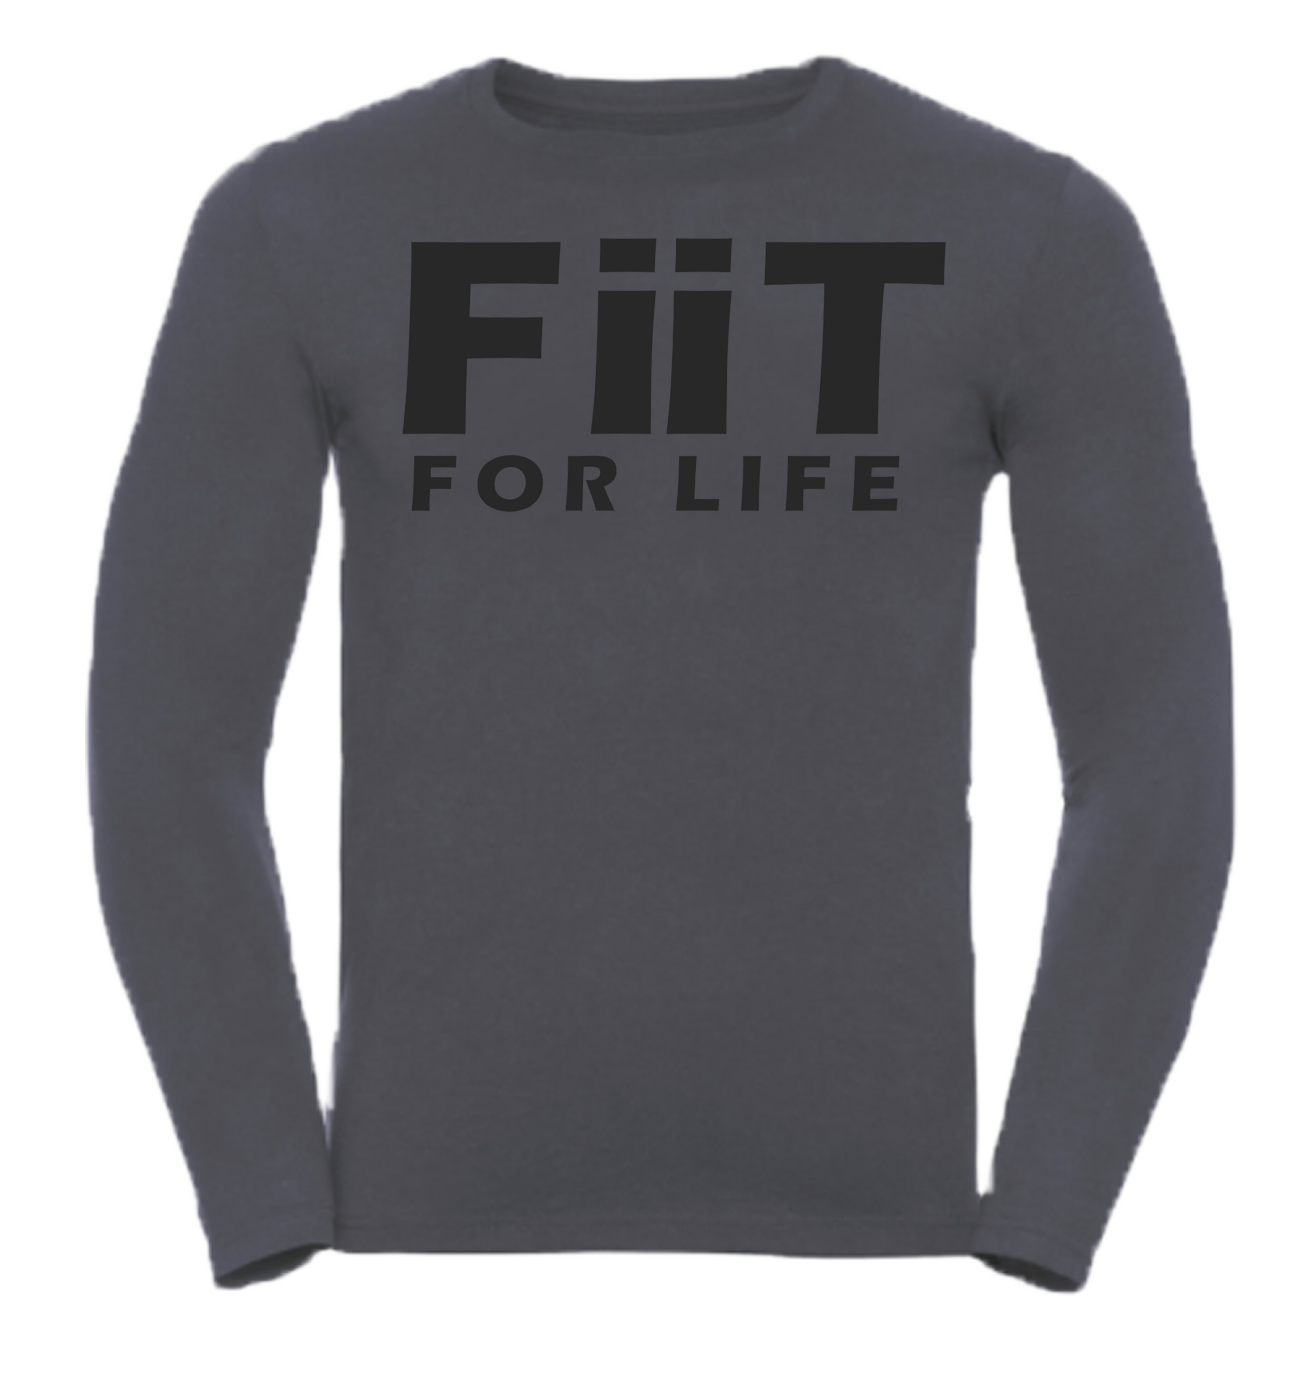 FiiT For Life - Long Sleeve Training Top